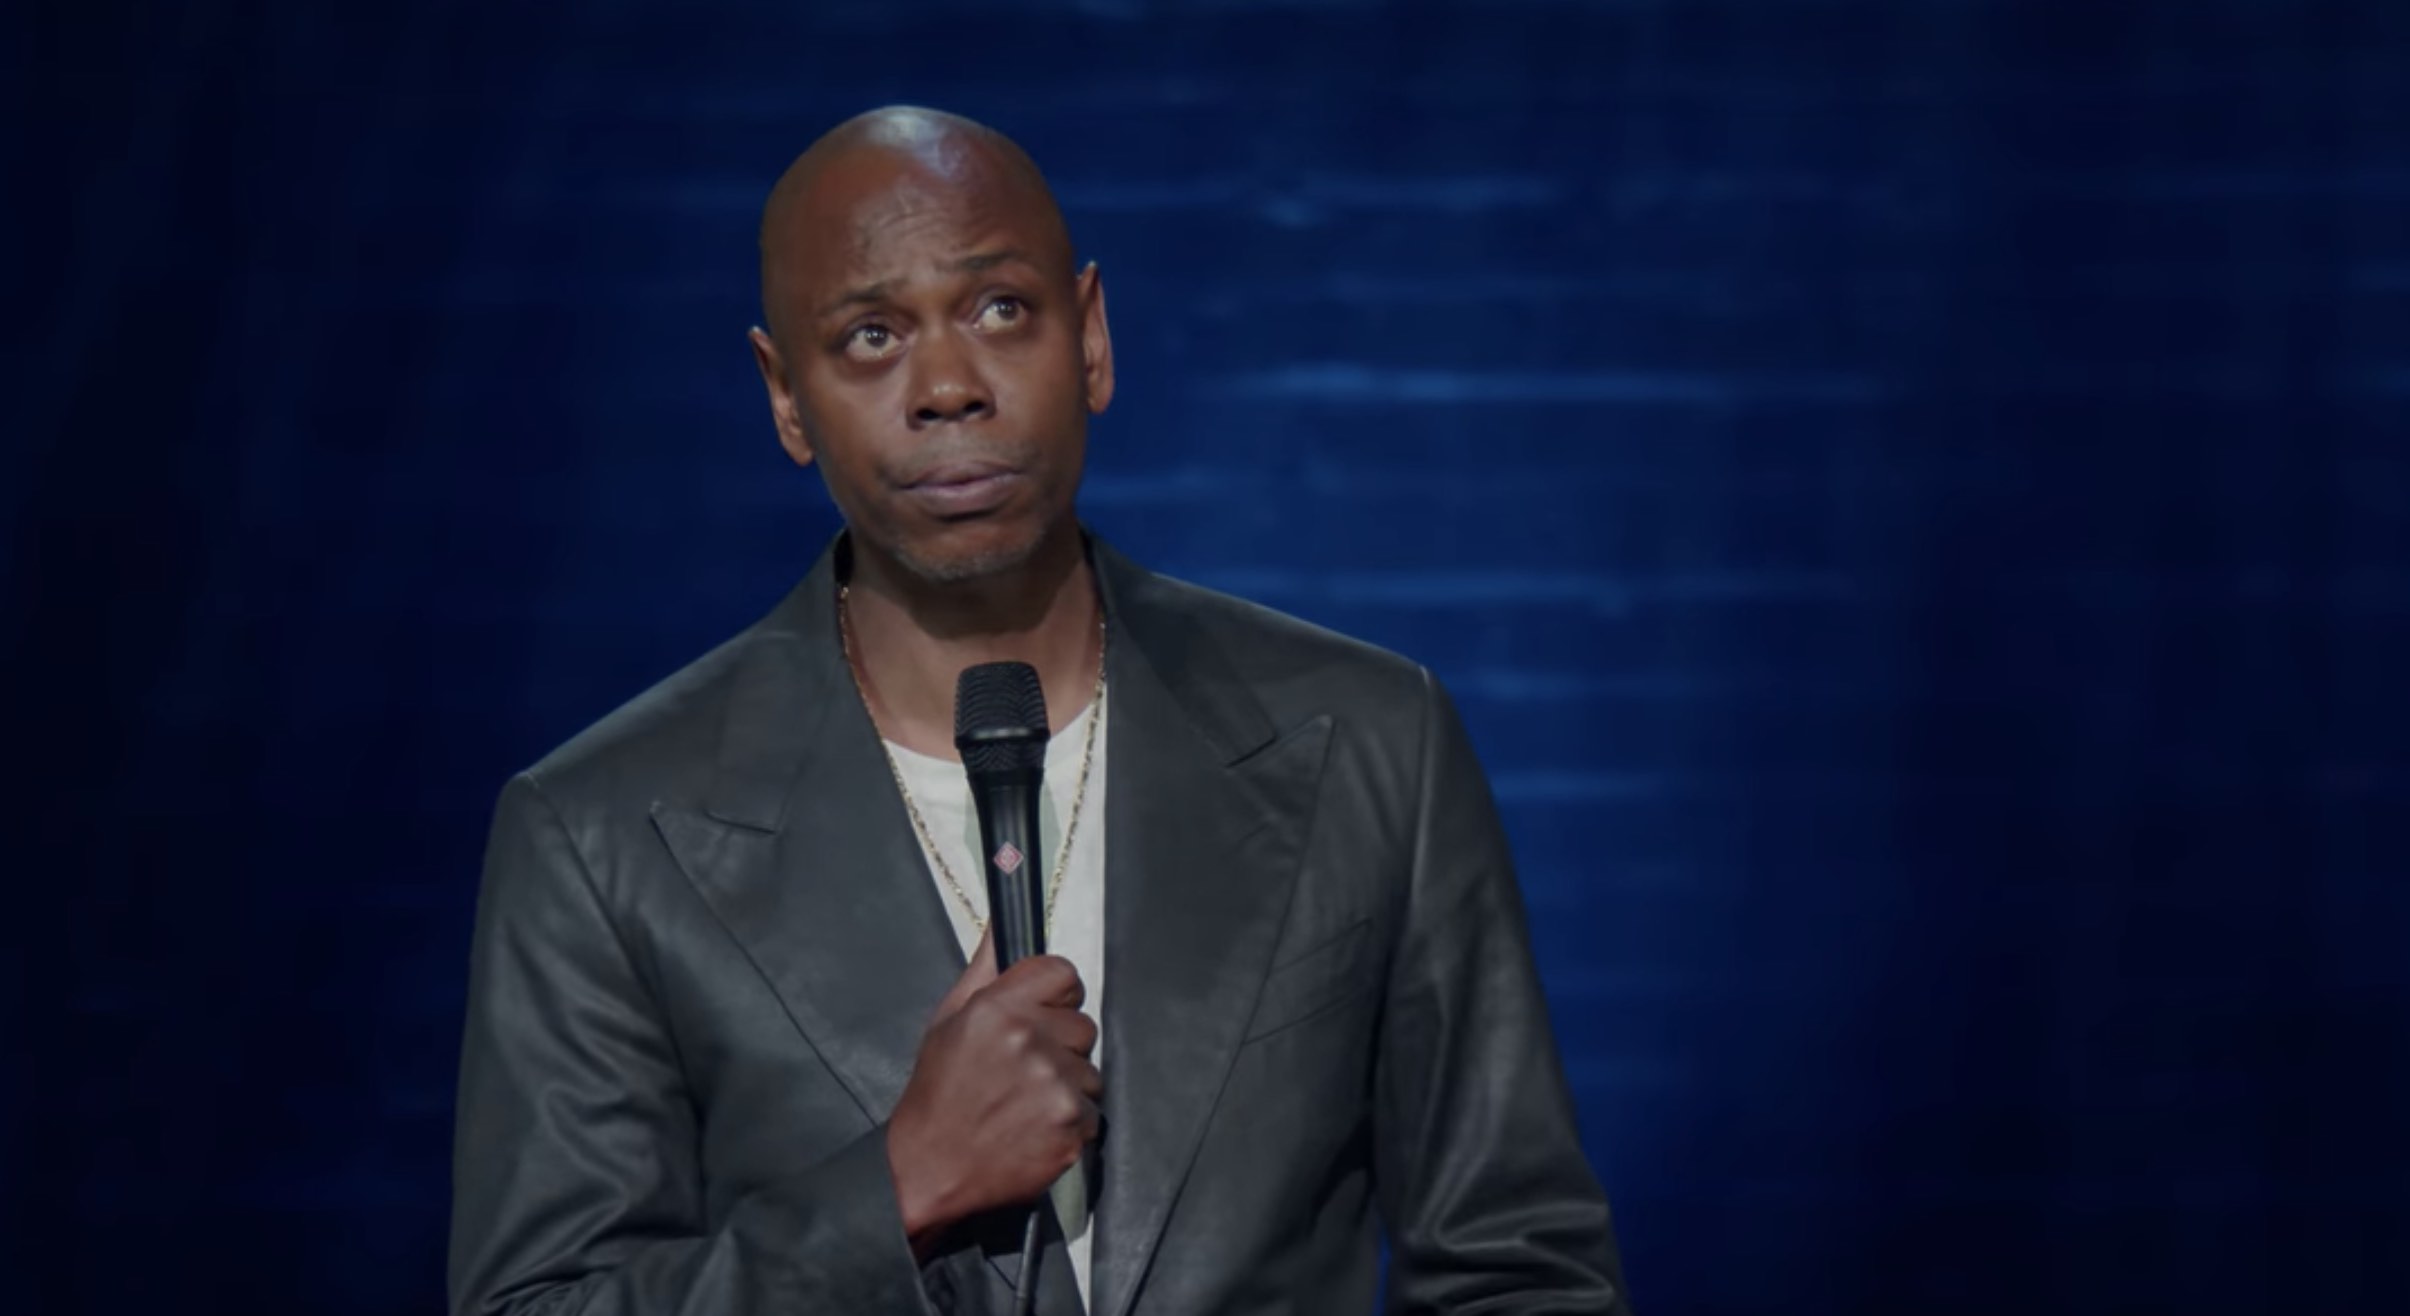 Dave Chappelle The Closer, Netflix race and class examined